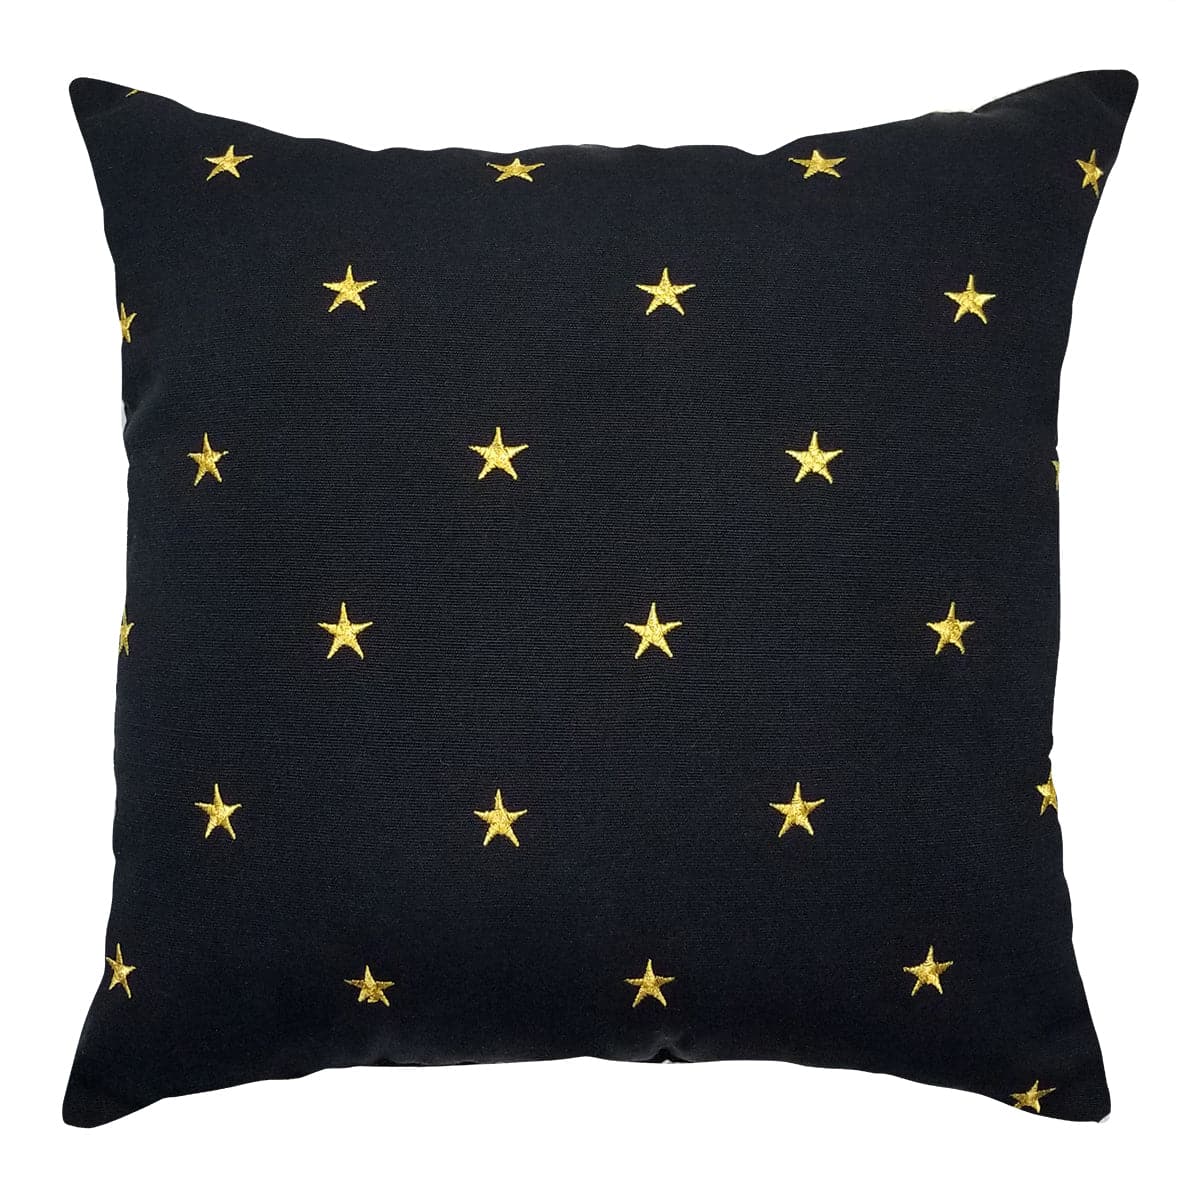 Embroideries Stars Toss Pillow - 14" - Gold Embroidered Throw Pillow (Black)